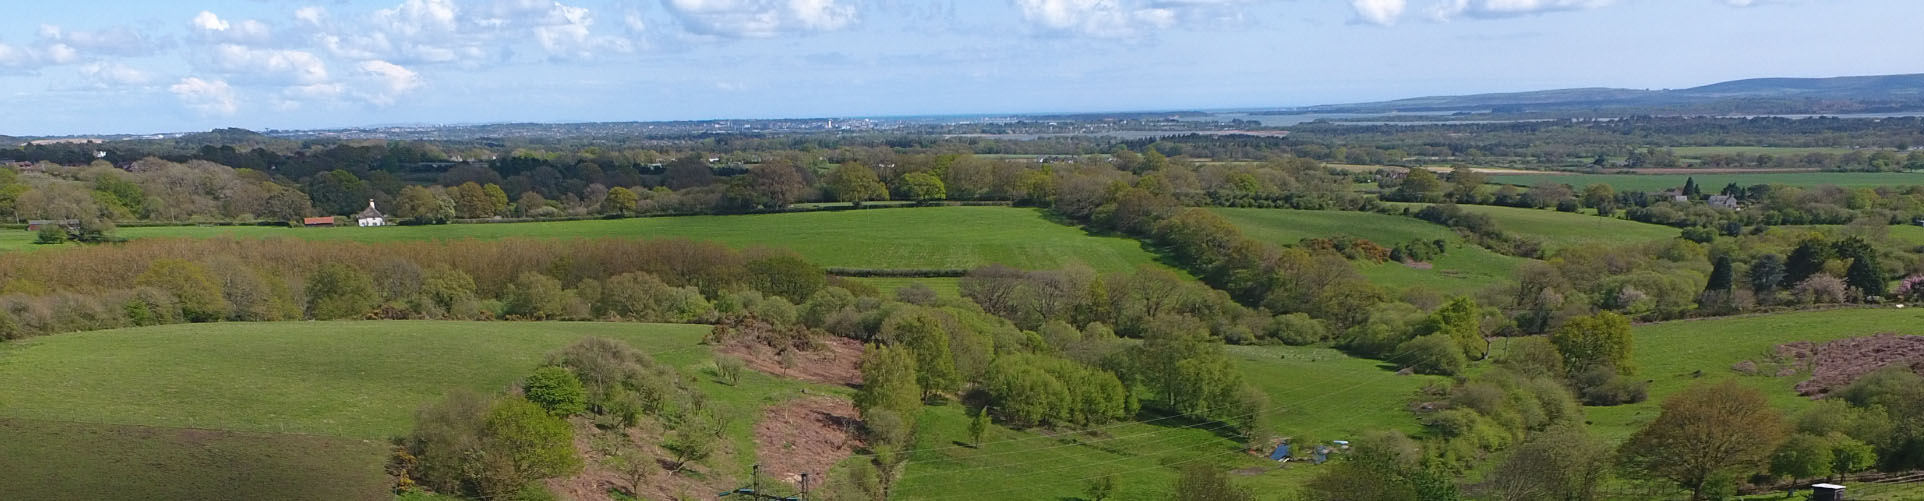 Aerial photo of Upton Country Park looking towards Poole Harbour